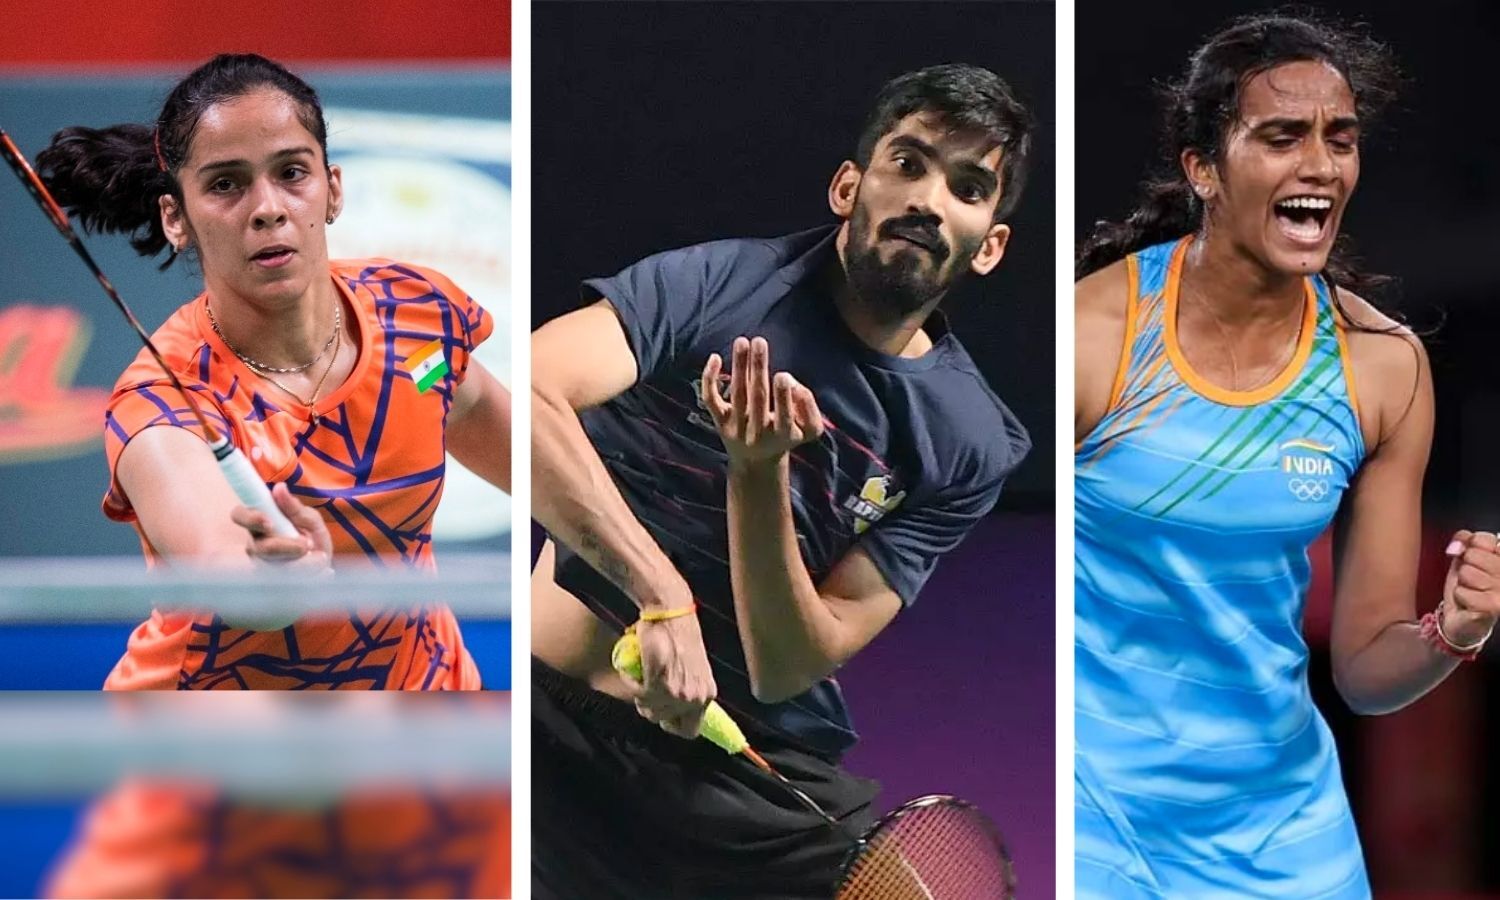 Swiss Open 2022 LIVE - Day 2 - Sindhu, Saina, Srikanth in action